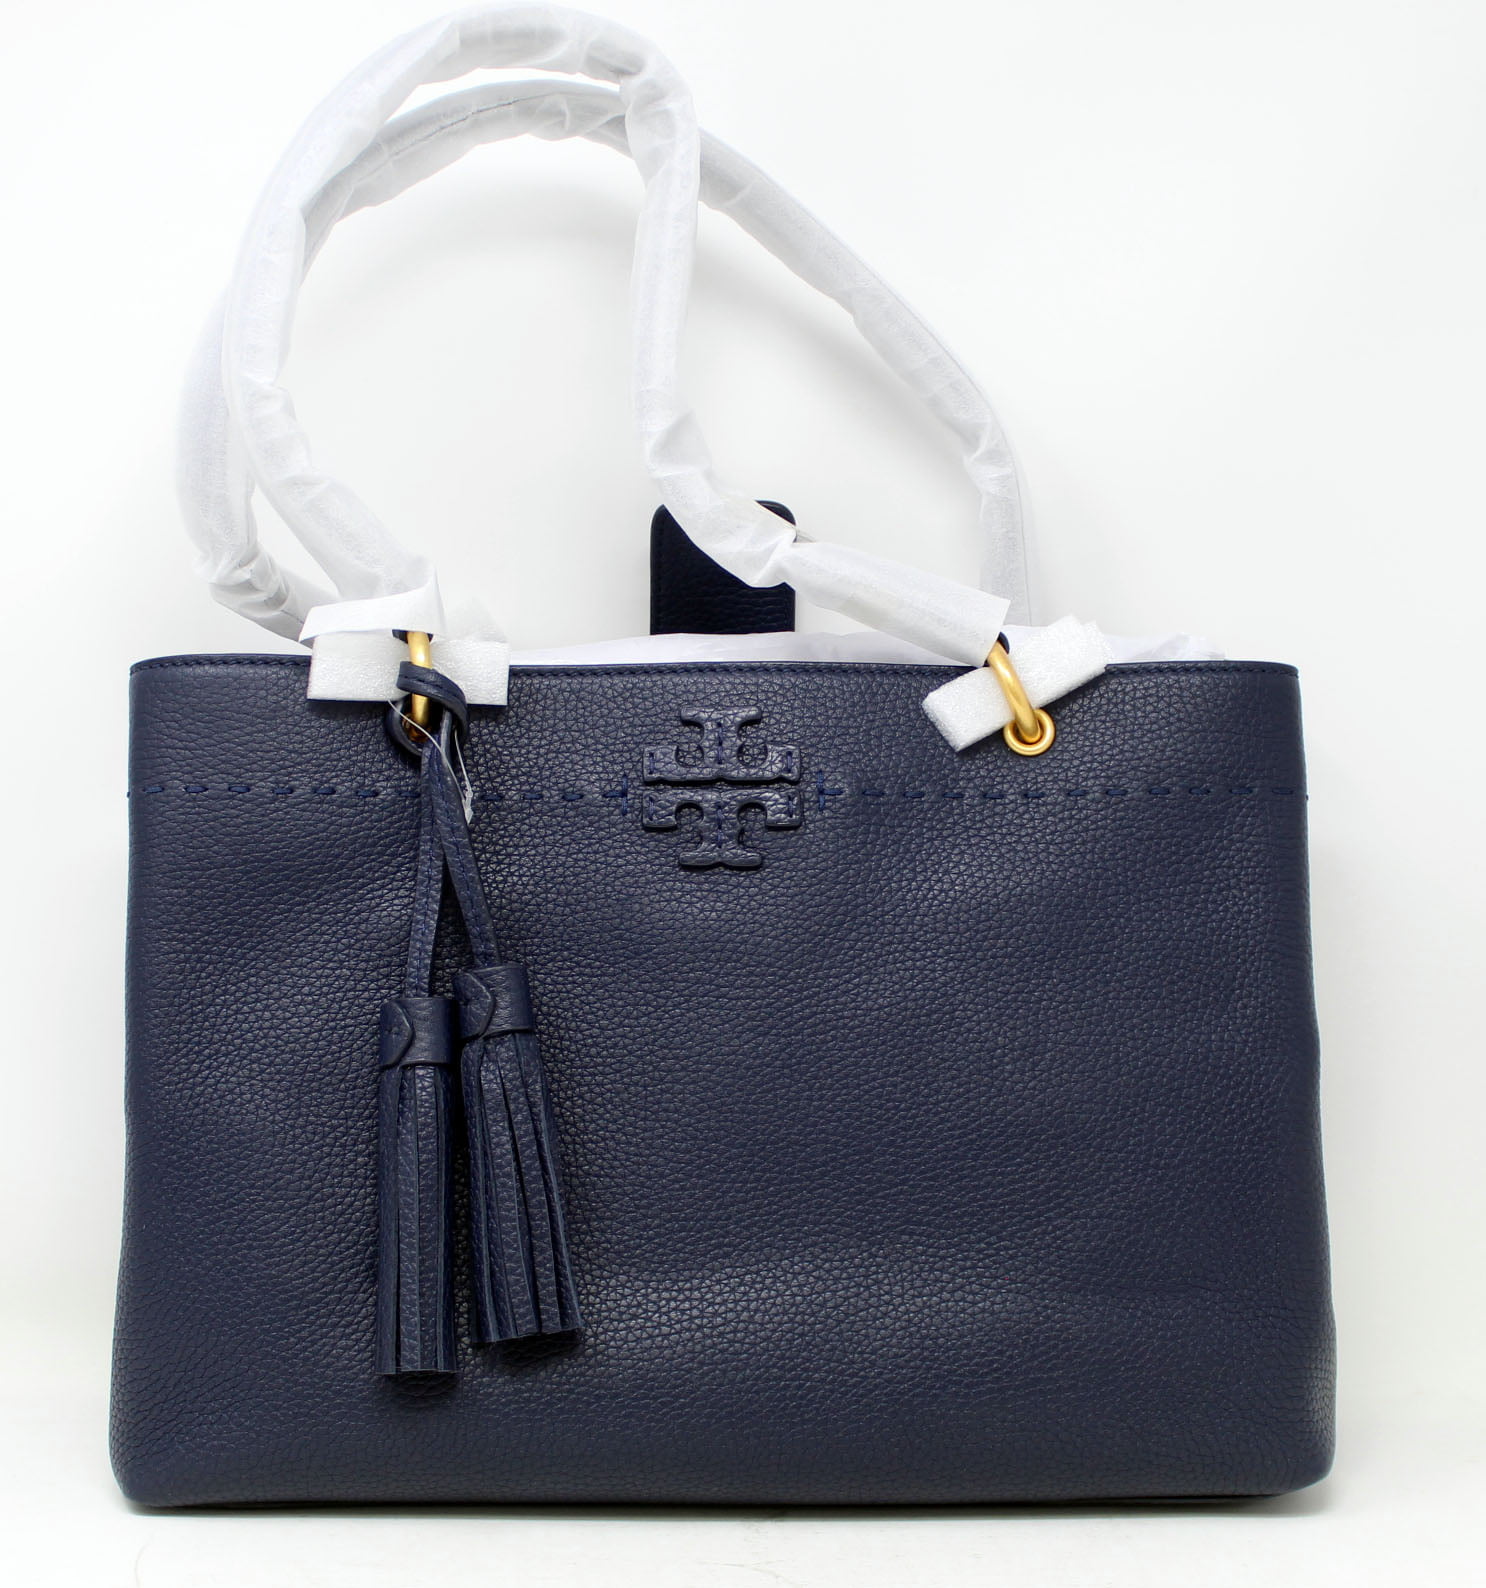 Tory Burch McGraw Triple Compartment Tote Pebbled Leather Navy Blue